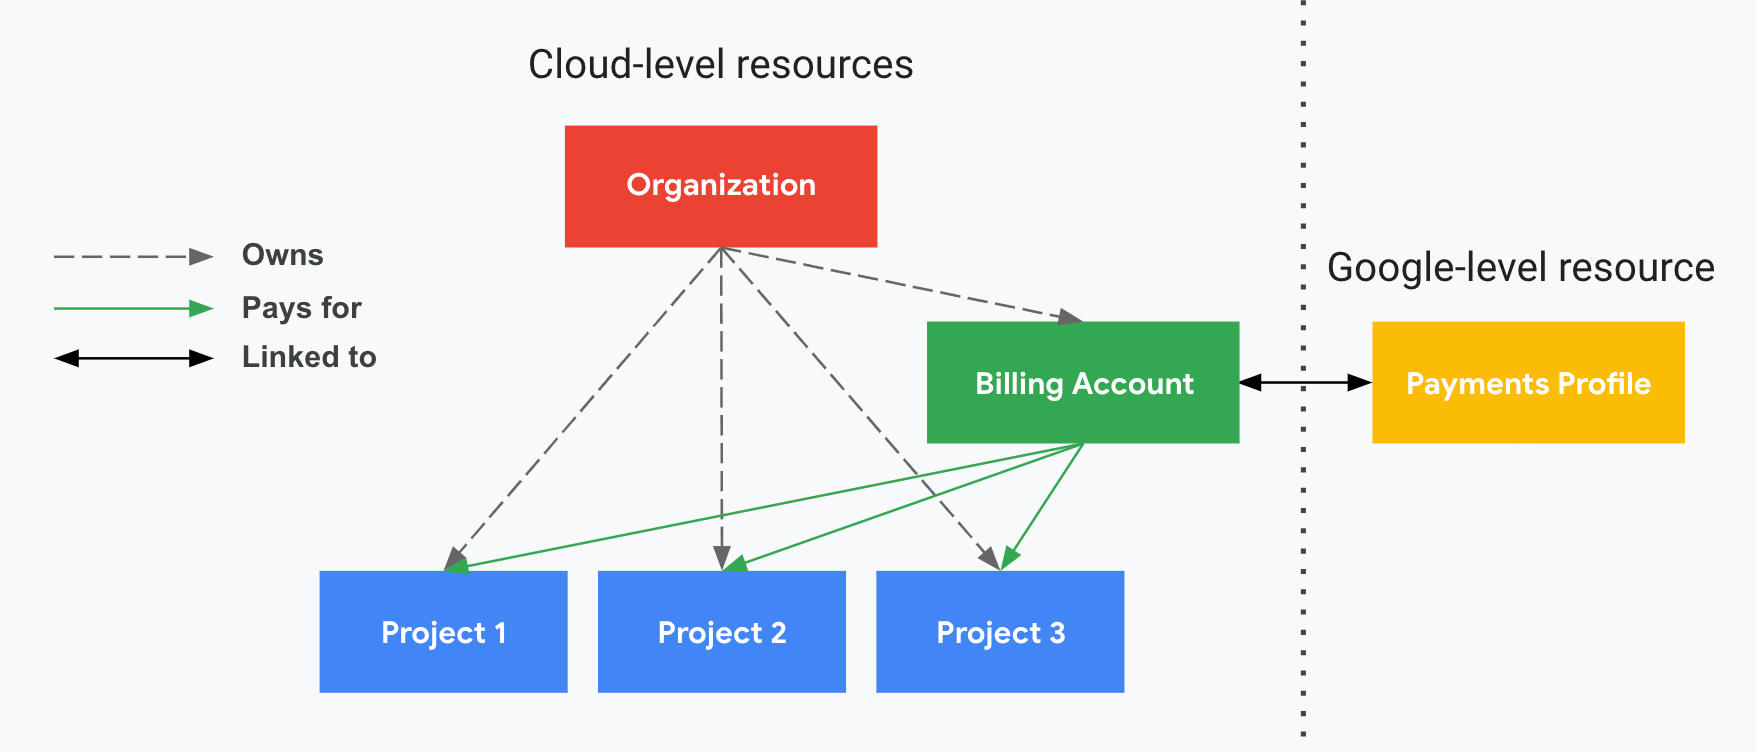 Illustrates how projects relate to a Cloud Billing account
      and a Google payments profile. One side shows your
      Google Cloud-level resources (Cloud Billing account and
      associated projects) and the other side, divided by a vertical dotted
      line, shows your Google-level resource (a Google payments profile).
      Your projects are paid for by your Cloud Billing account,
      which is linked to a Google payments profile.